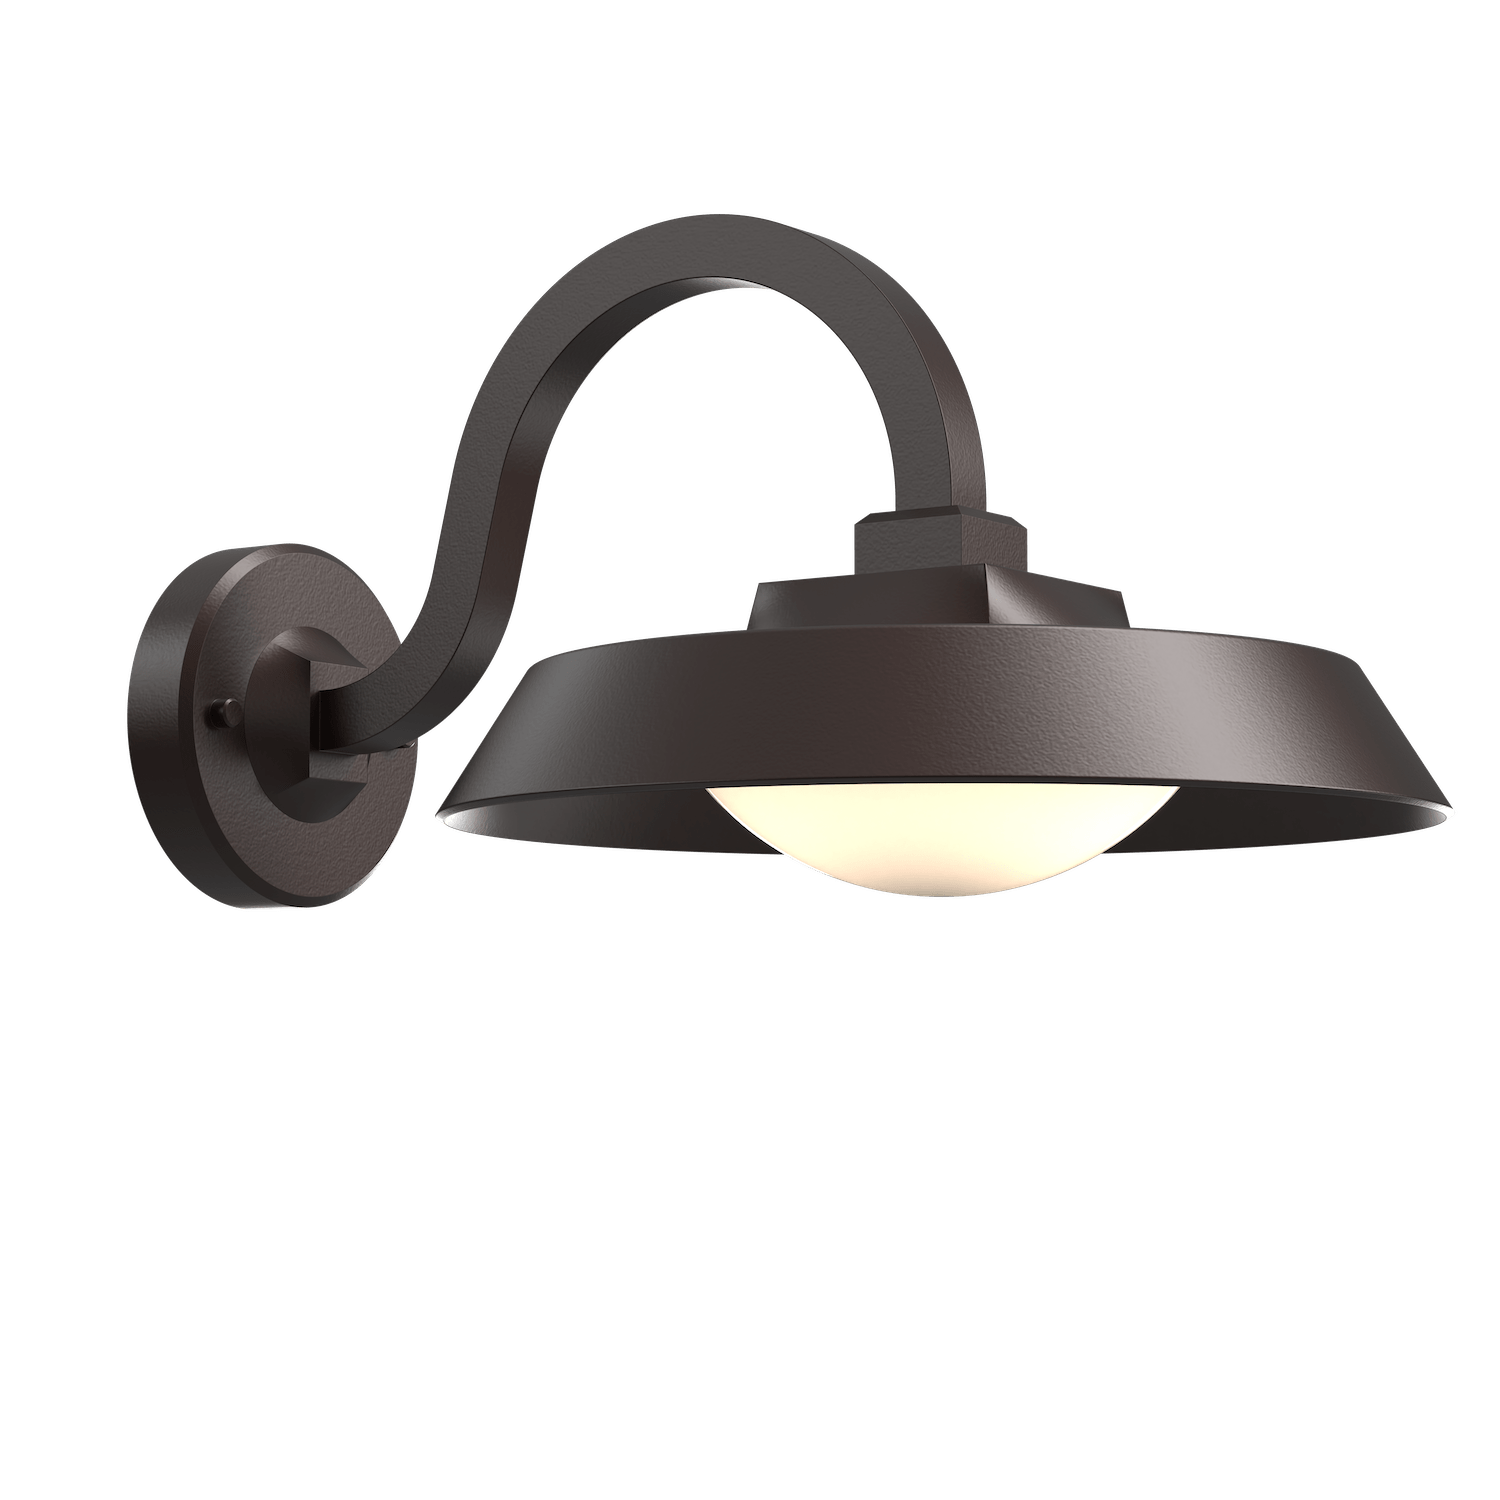 ODB0073-01-SB-O-Hammerton-Studio-Farmhouse-9-inch-outdoor-sconce-with-statuary-bronze-finish-and-frosted-glass-shade-and-LED-lamping